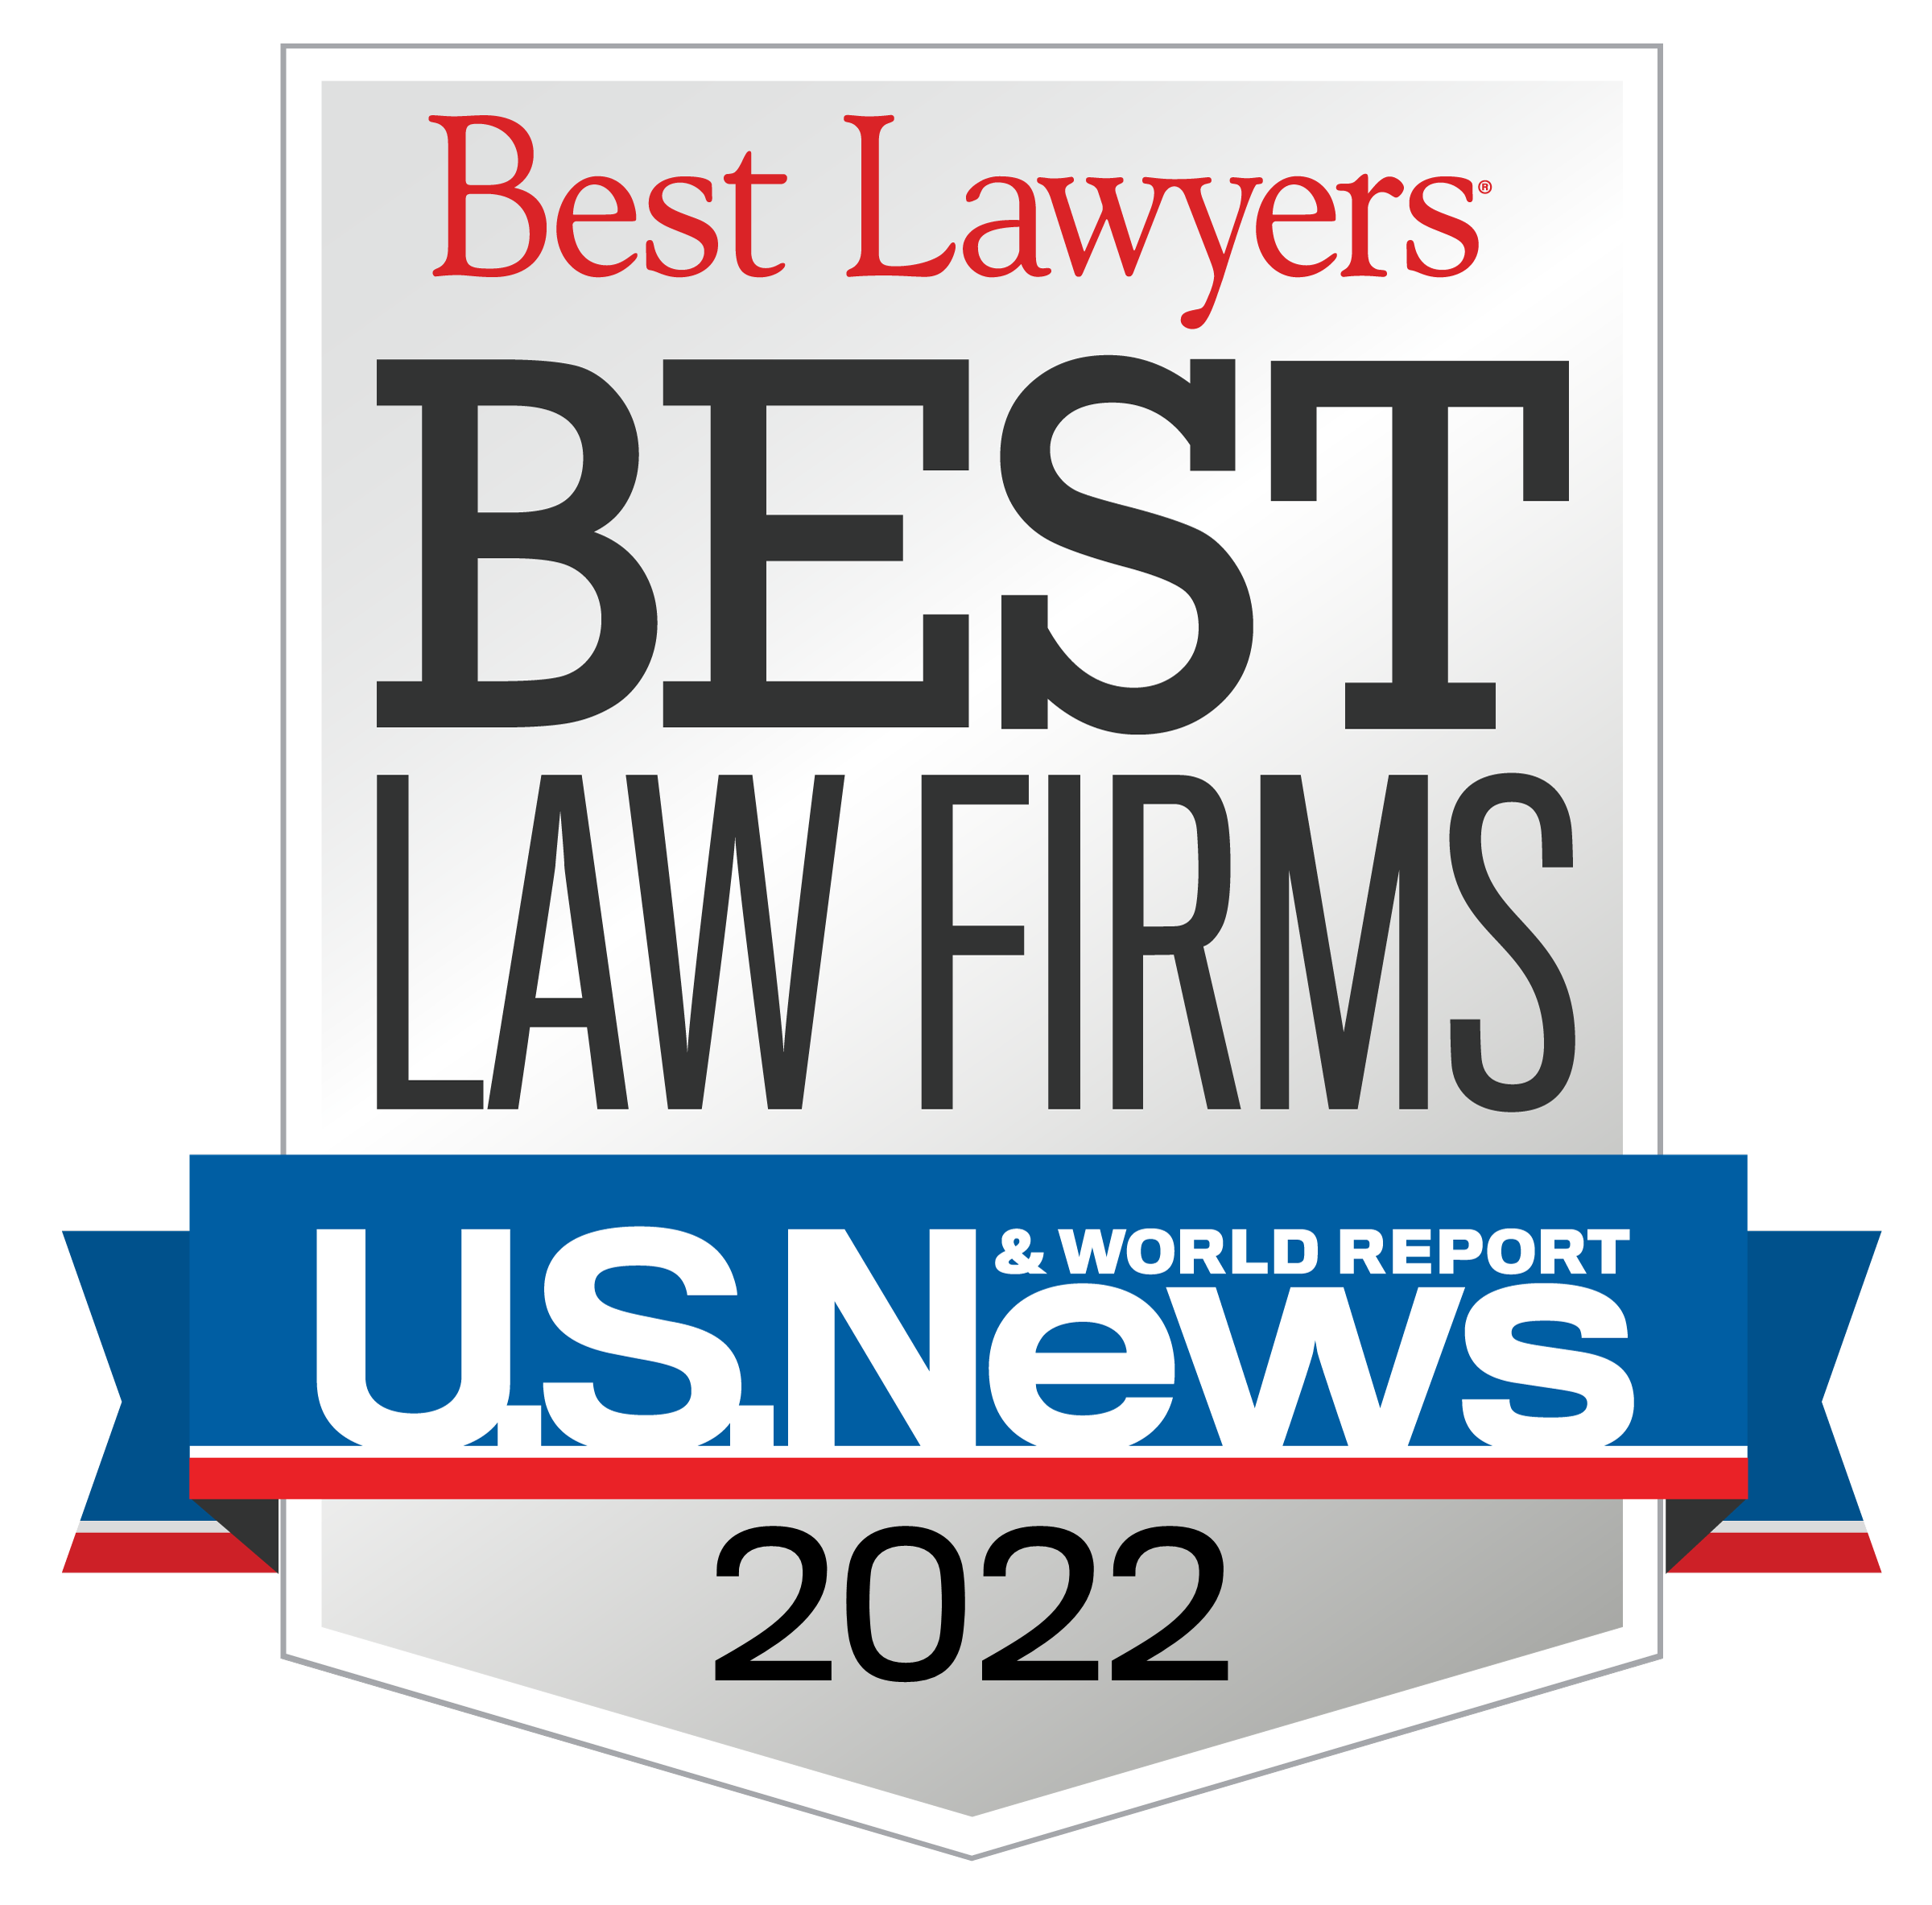 Law Firms 2022